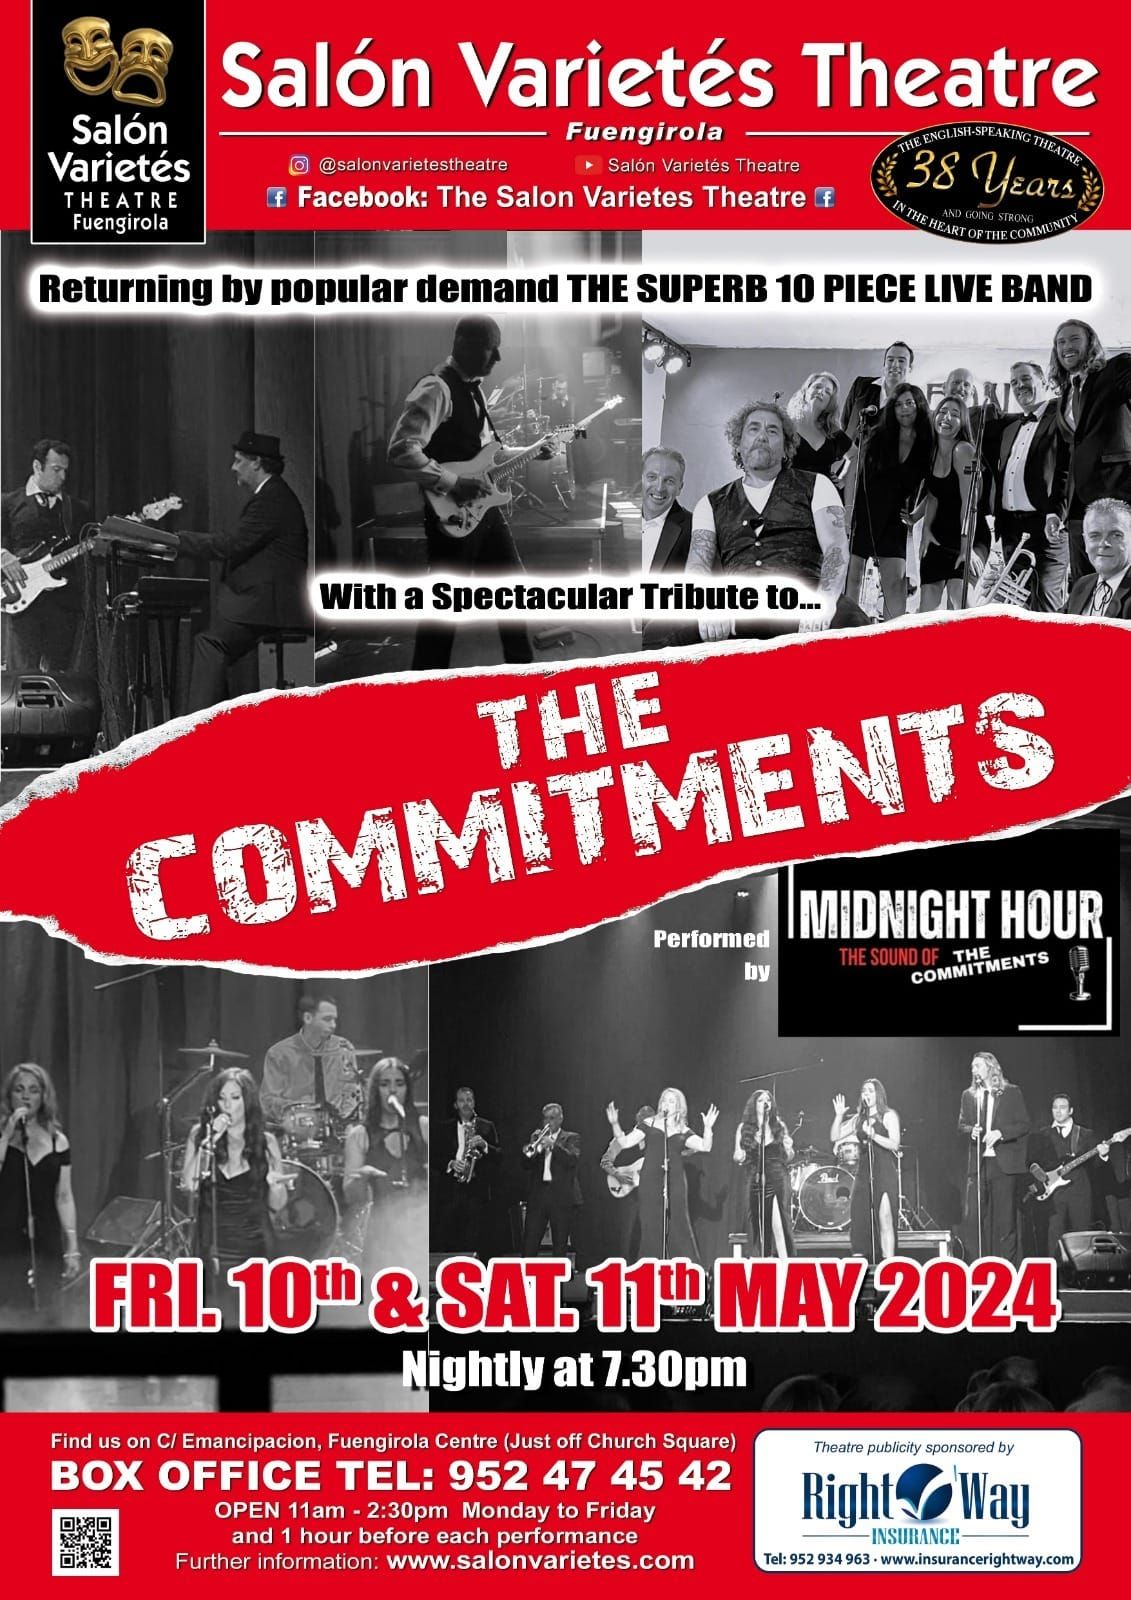 Live in Concert....Midnight Hour The Sound of The Commitments  